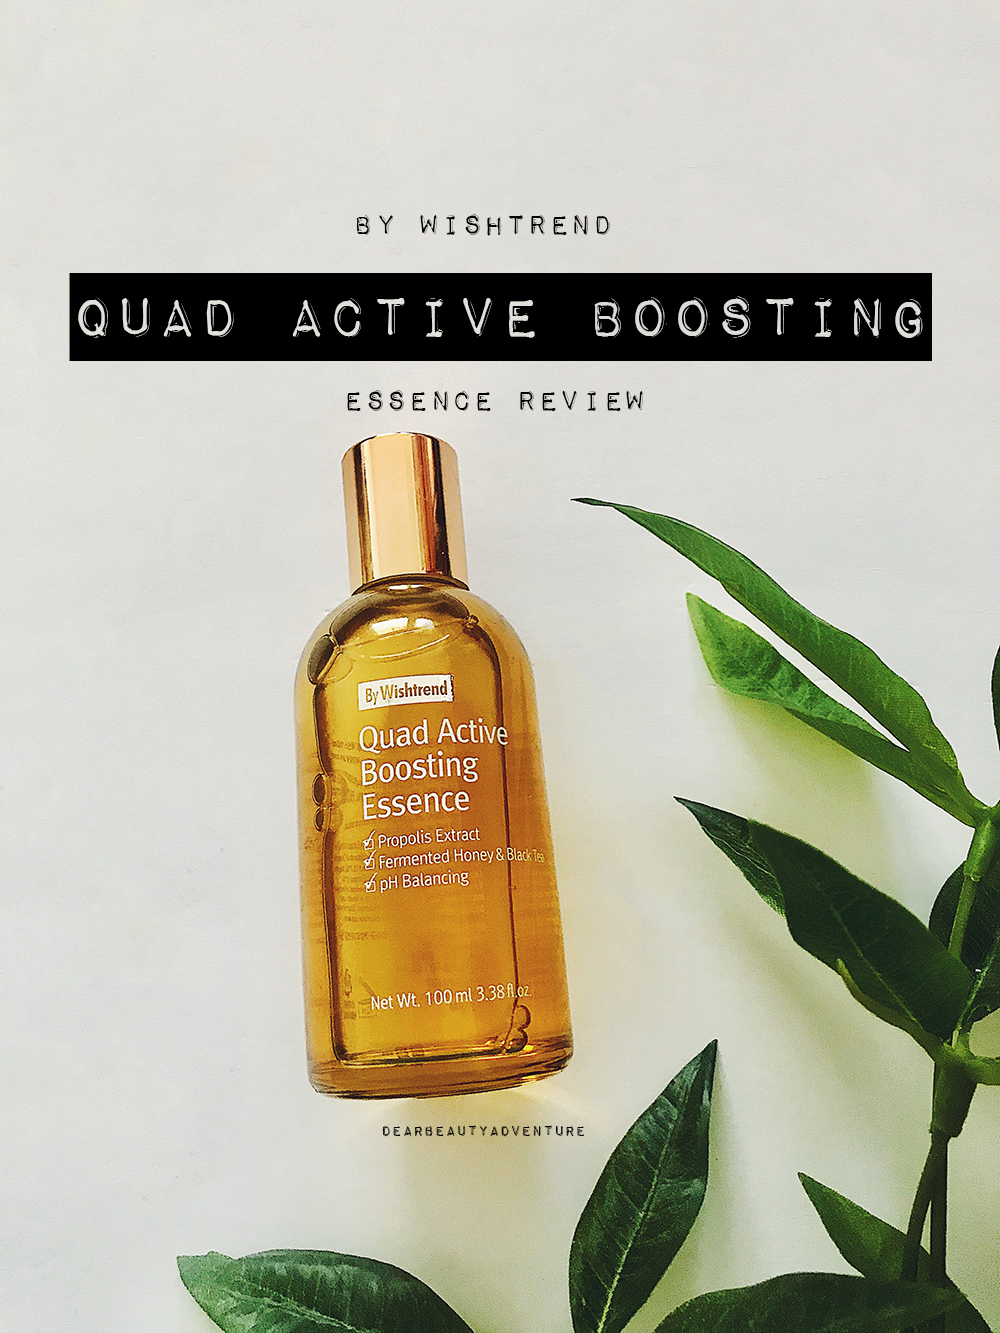 wishtrend quad active boosting essence review